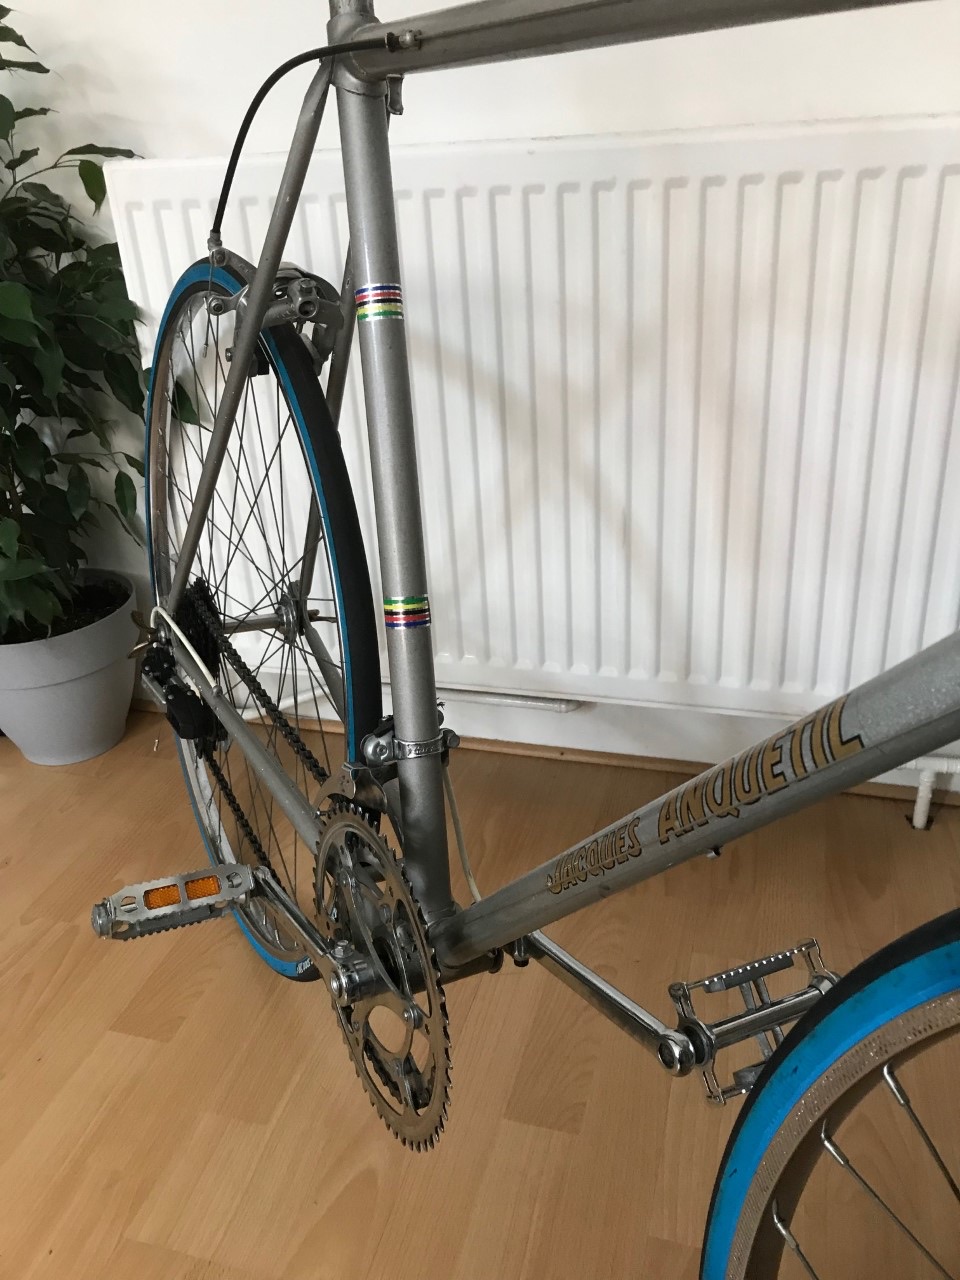 Seat tube image of Jacques Anquetil bike